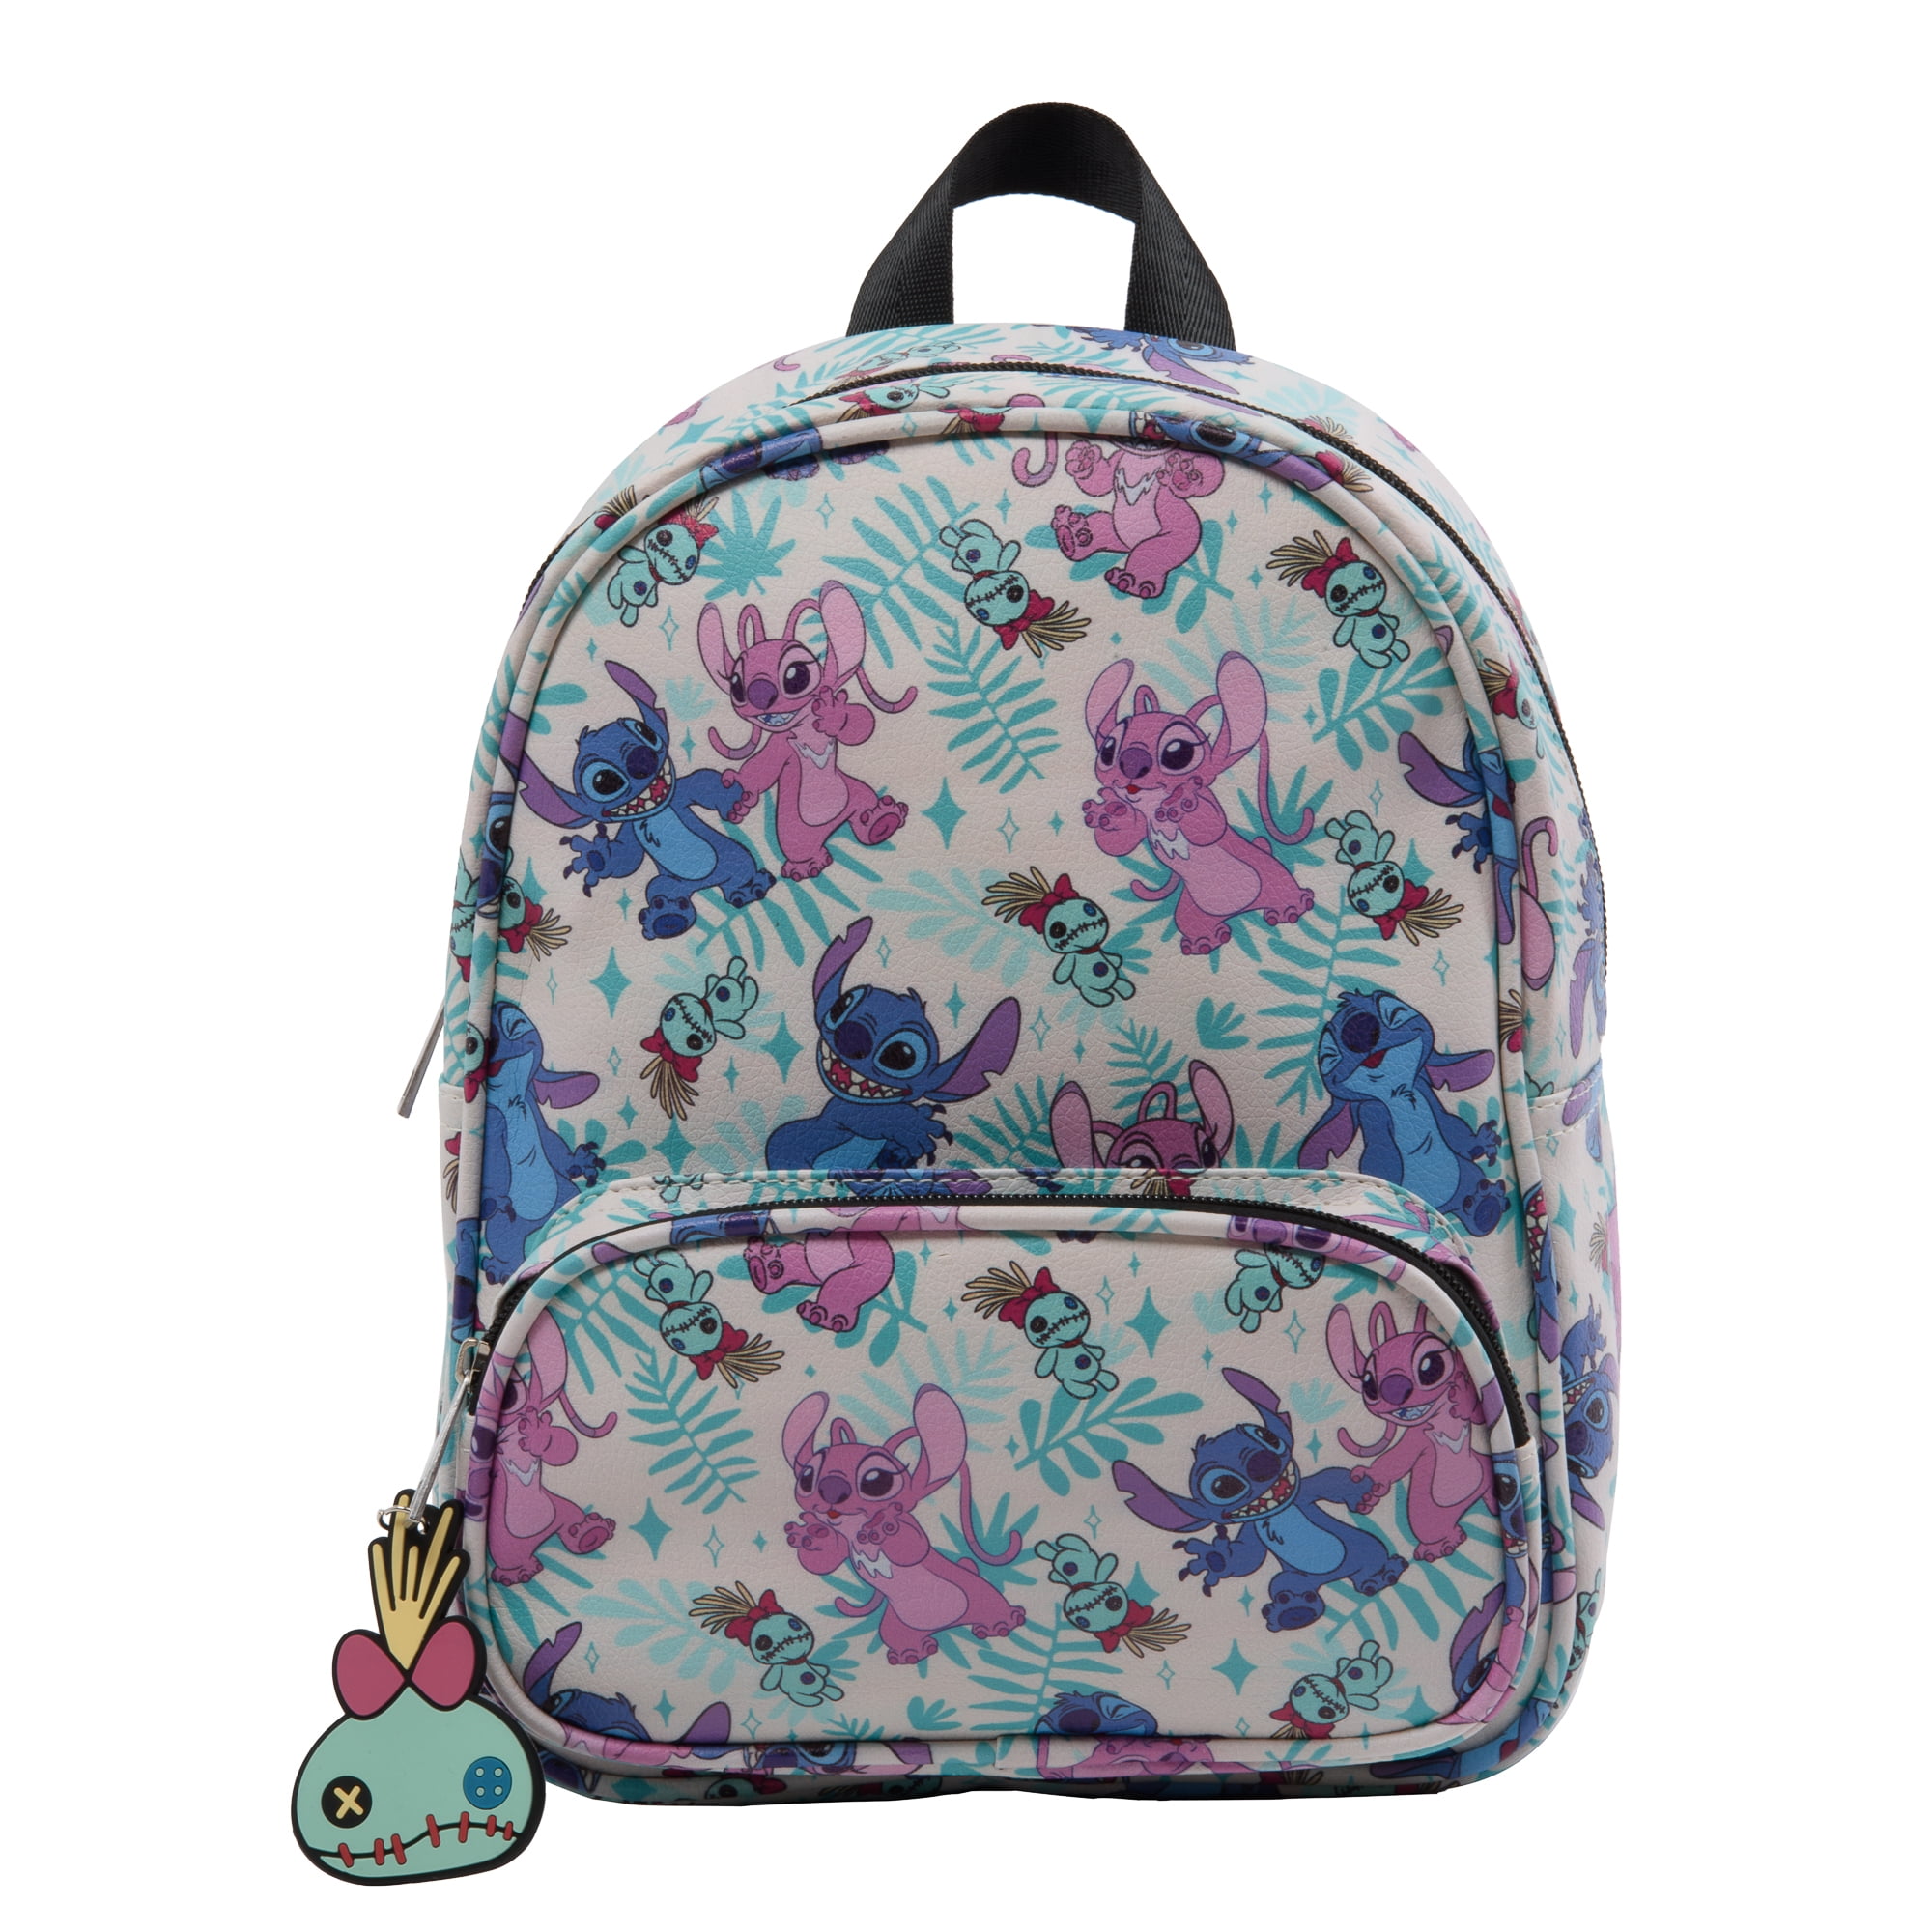 Loungefly x Disney Stitch in Space Allover-Print Mini Backpack (One size, Black Multi)